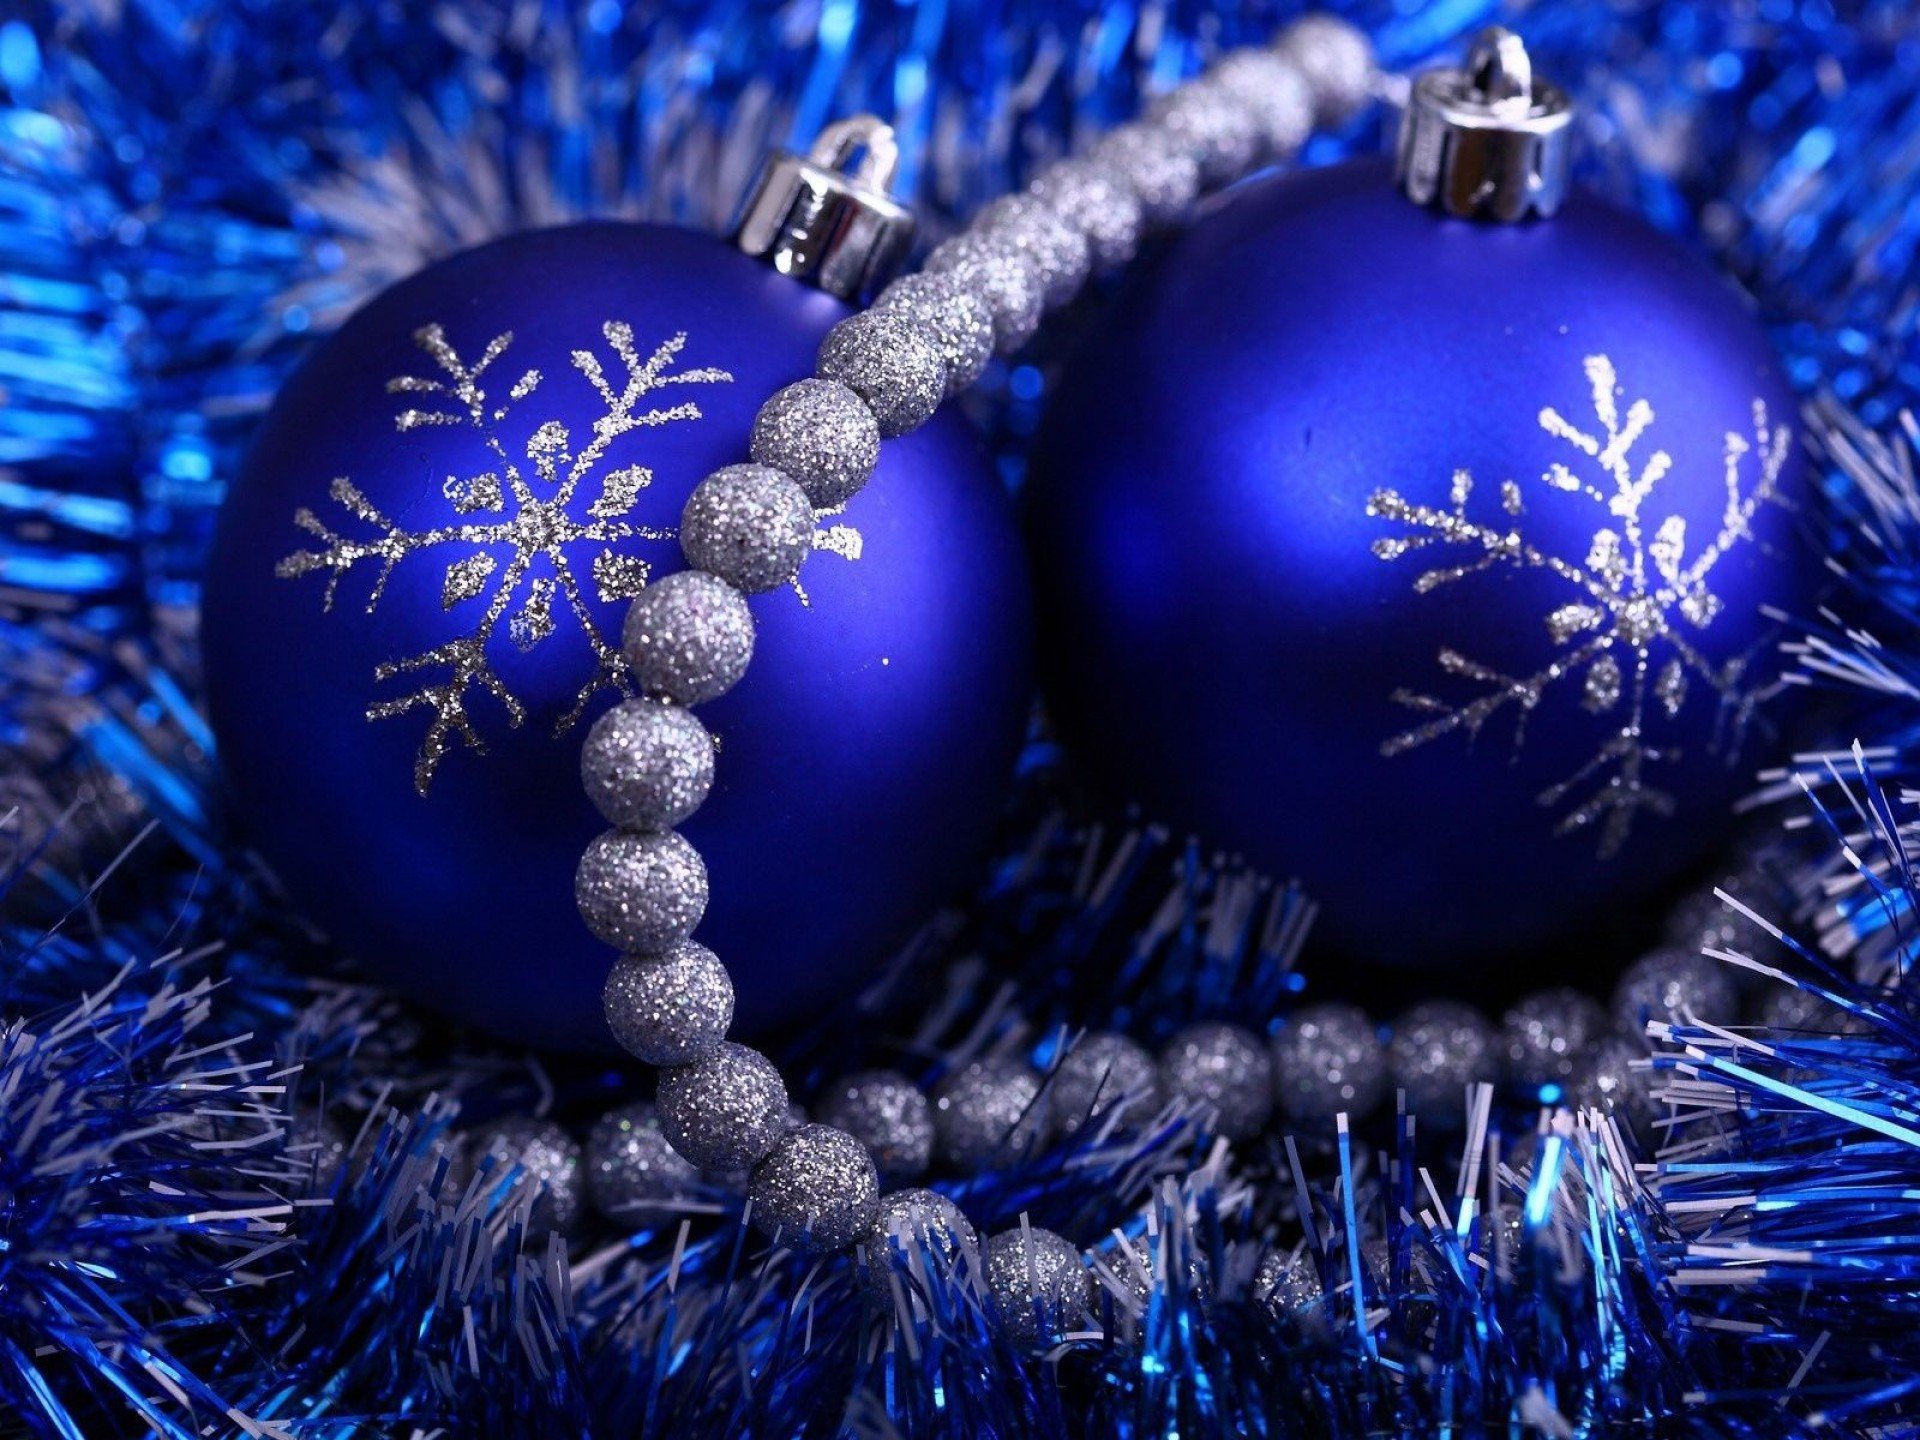 Download hd 1920x1440 Christmas Ornaments/Decorations PC background ID:433928 for free